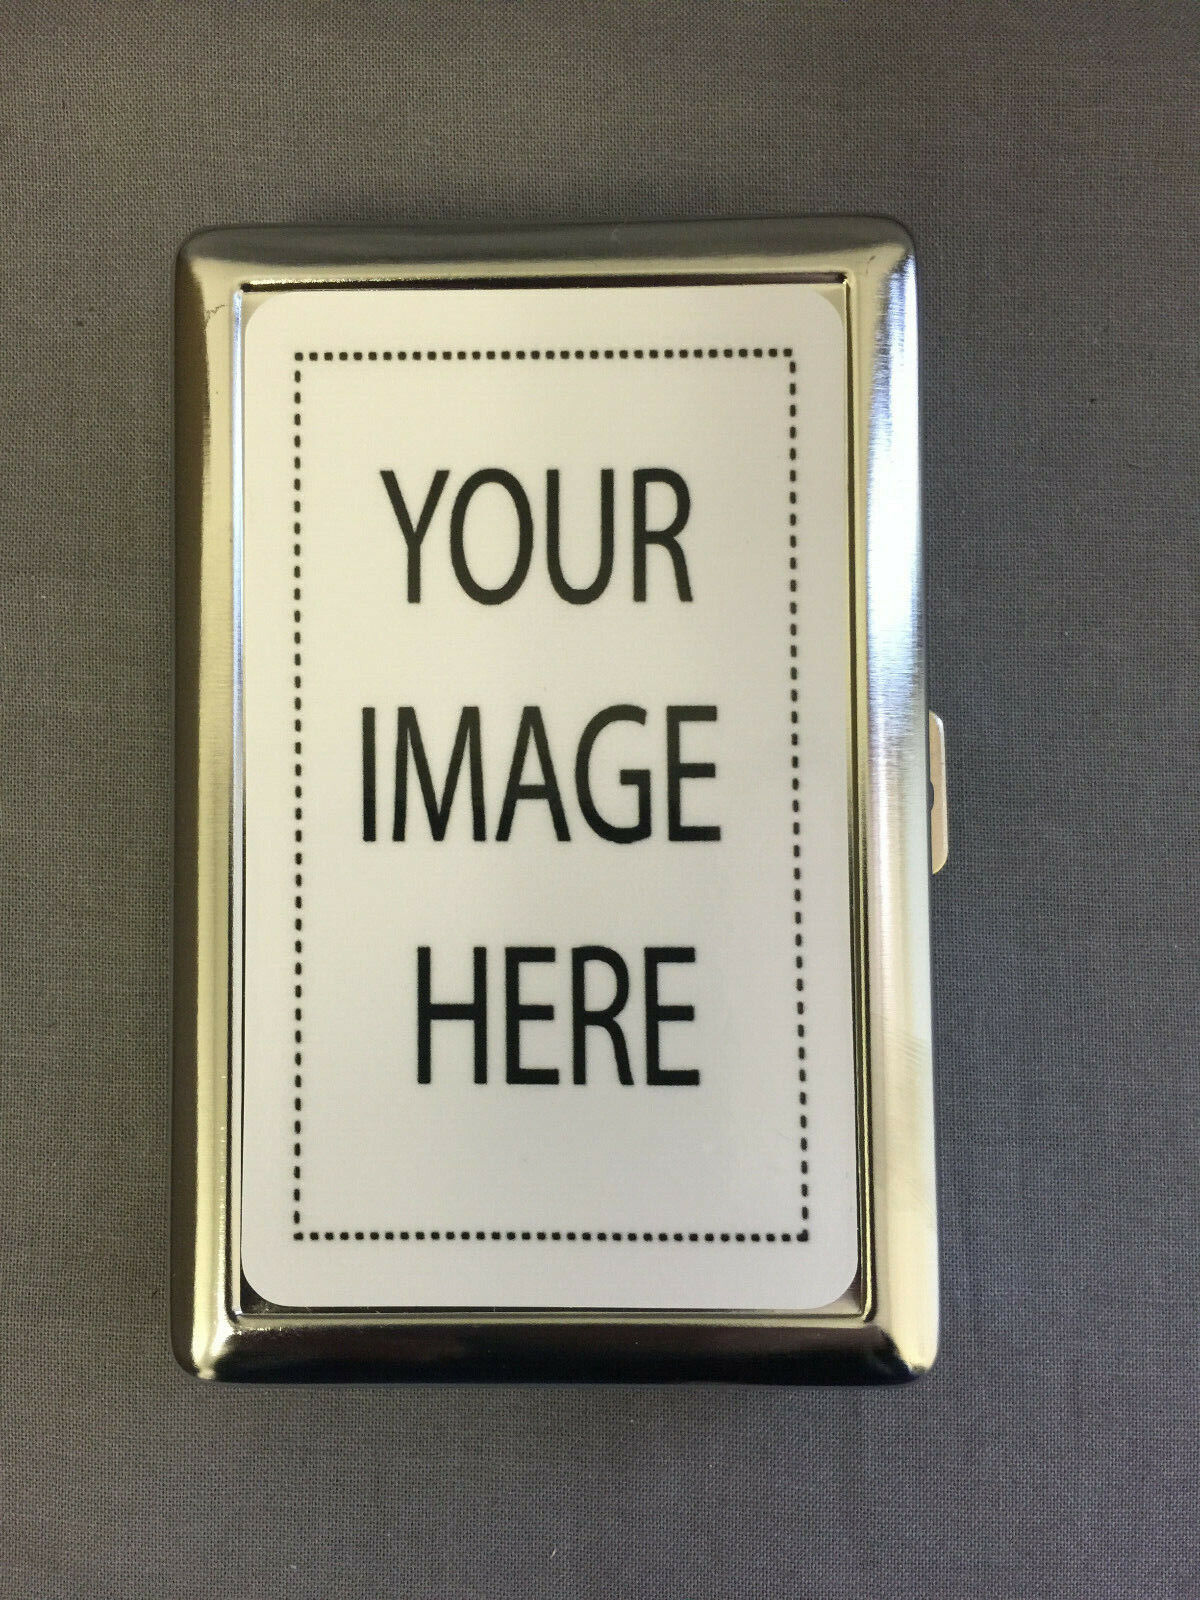 Custom Create Your Own Silver Cigarette Case / Metal Wallet Card Money Holder 